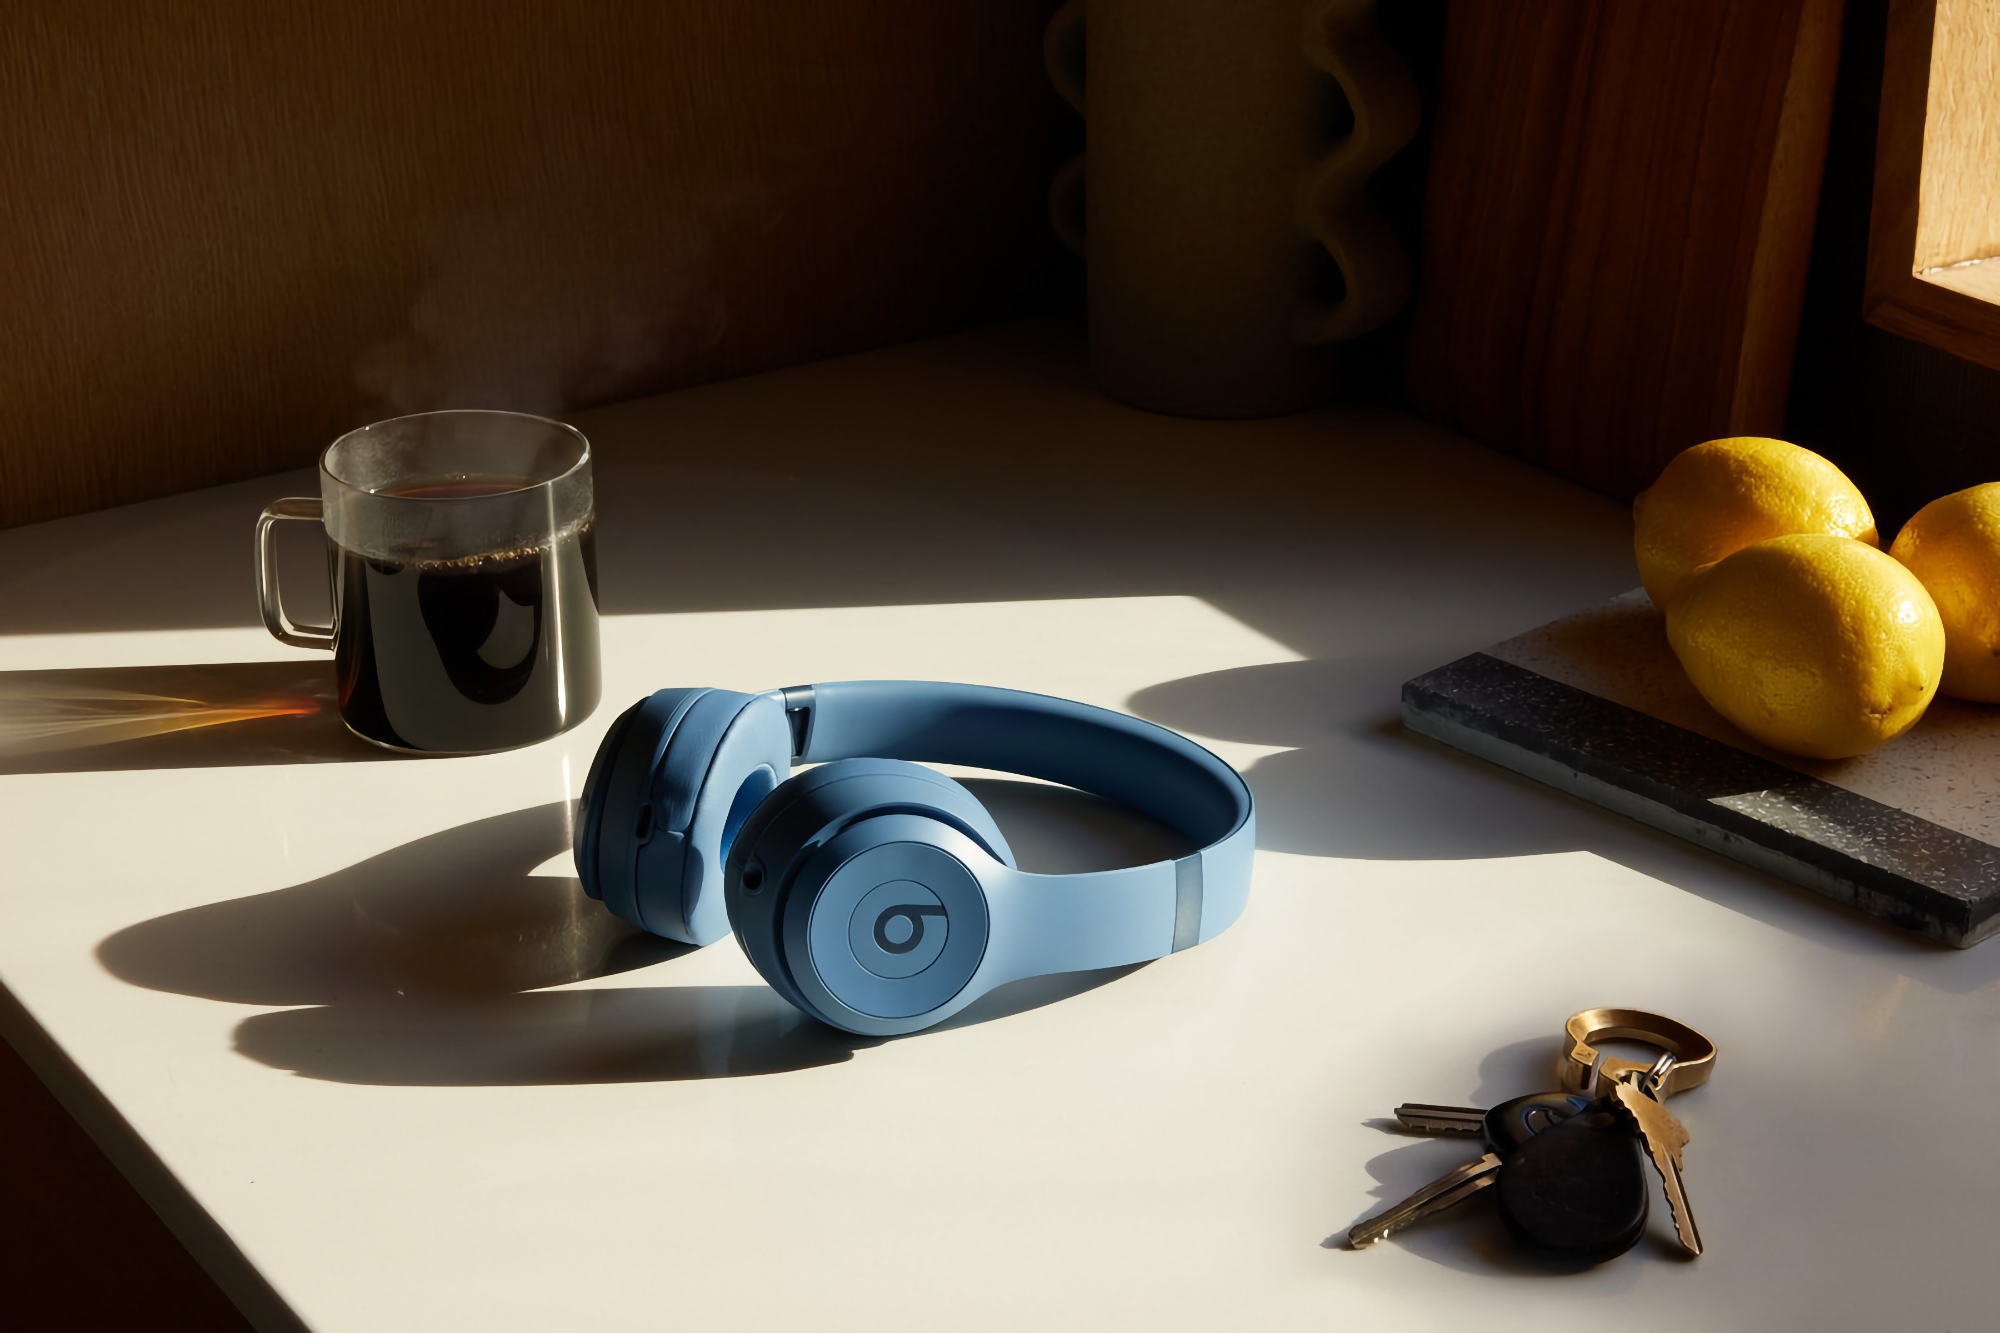 Beats Solo 4: 40mm drivers, Spatial Audio support, USB-C port and up to 50 hours of battery life for $199